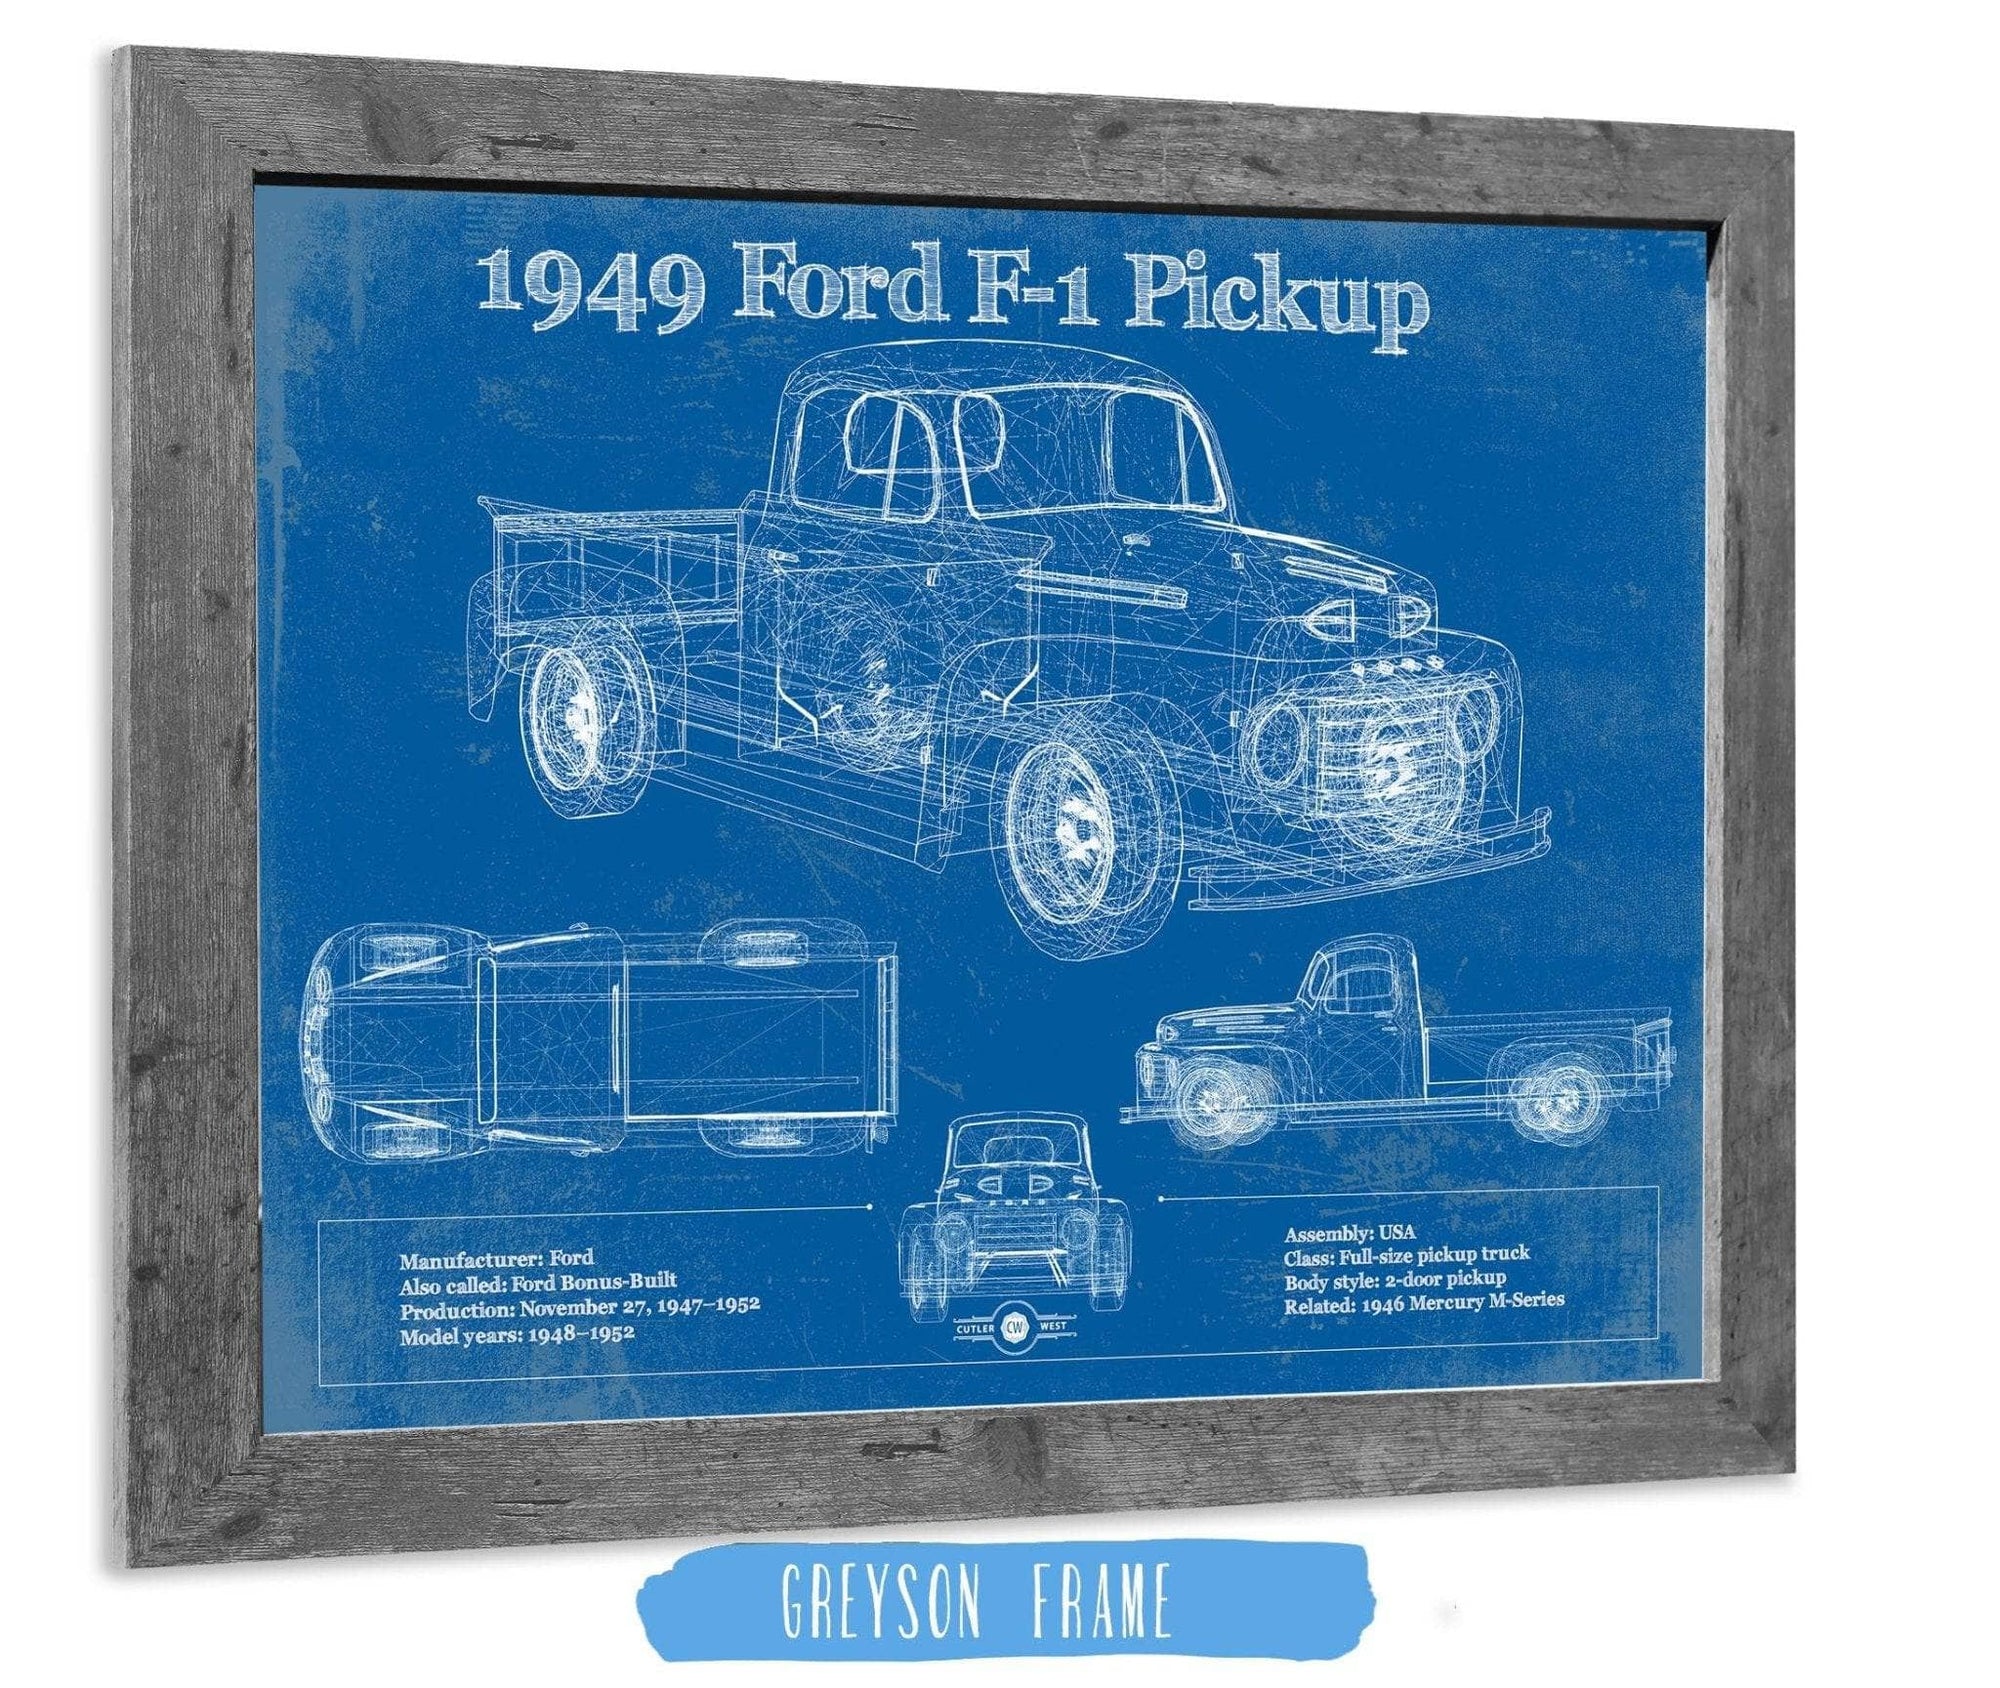 Cutler West Ford Collection 14" x 11" / Greyson Frame 1949 Ford F-1 Pickup Vintage Blueprint Auto Print 933311019_34356